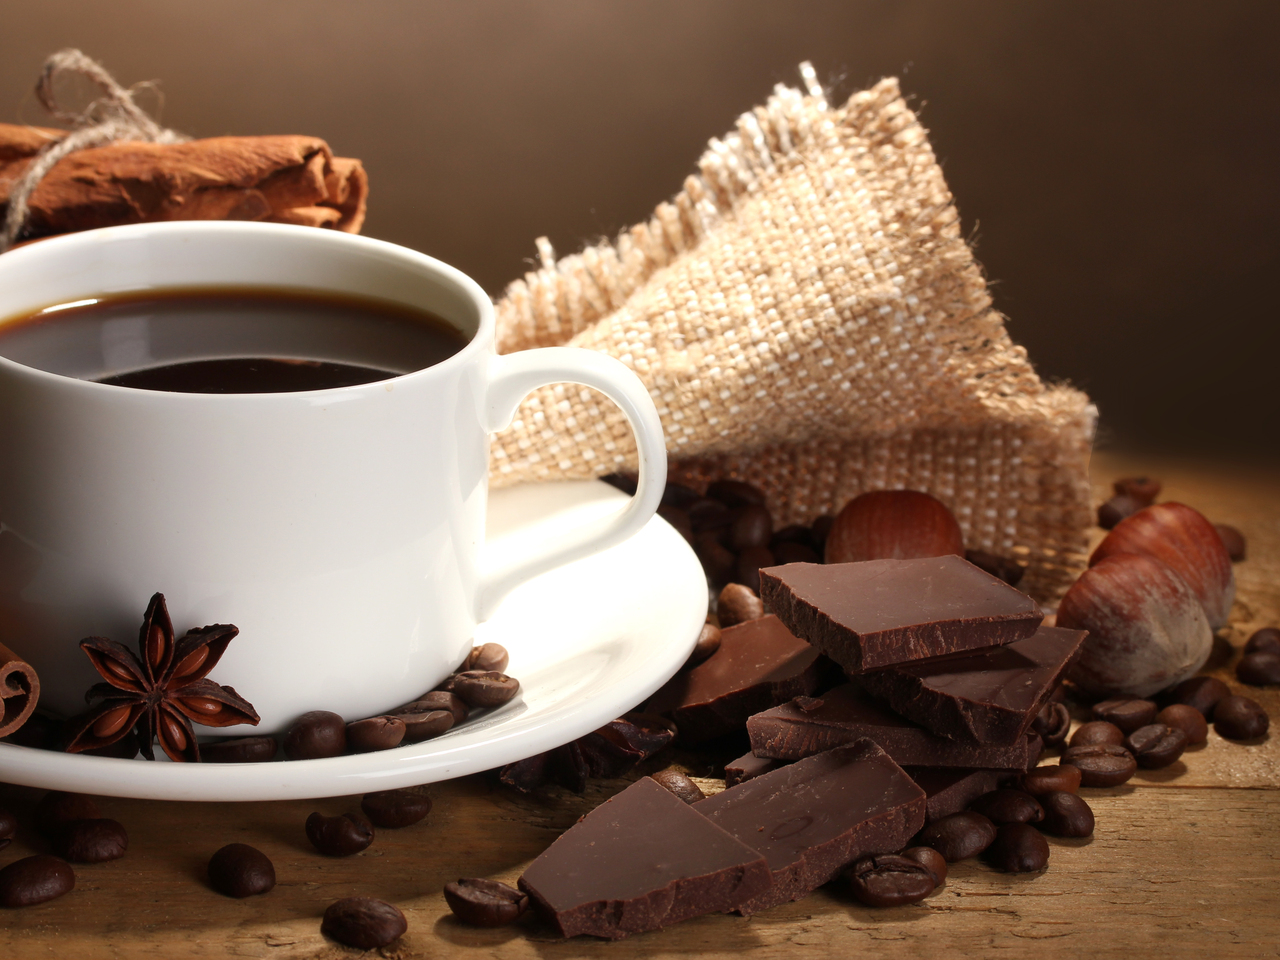 Wallpaper Pack coffe Desktop Wallpapers Pictures Themes